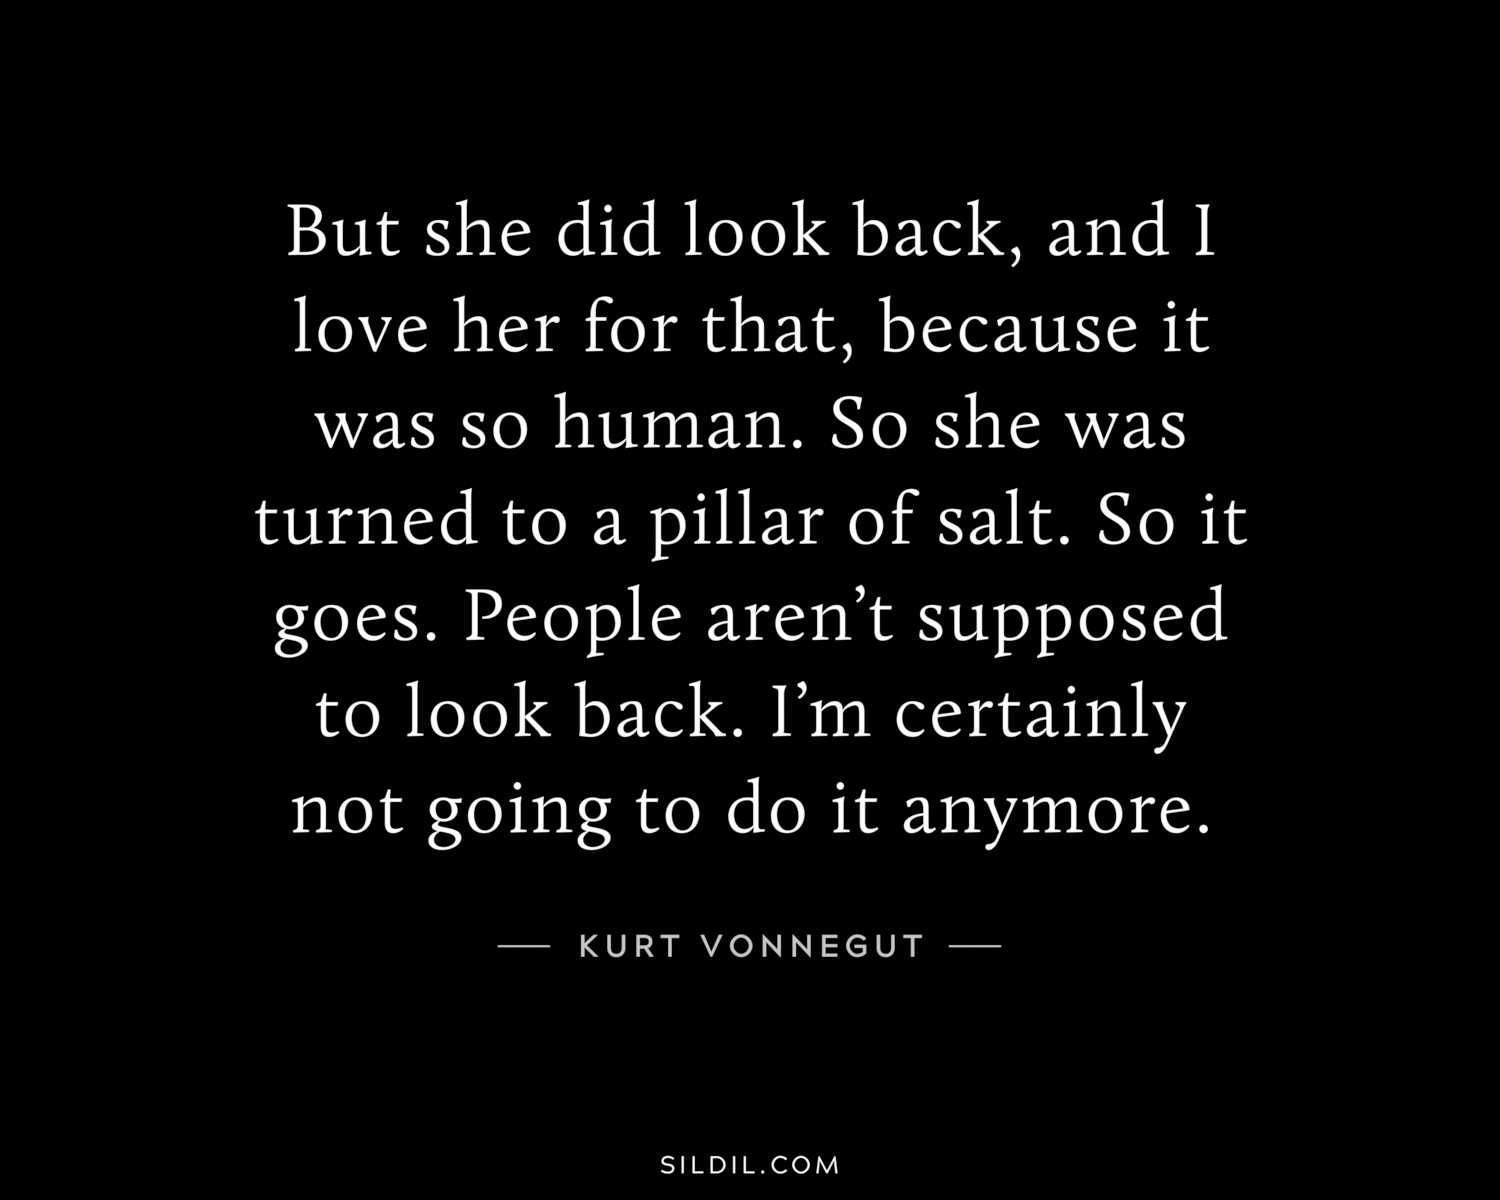 But she did look back, and I love her for that, because it was so human. So she was turned to a pillar of salt. So it goes. People aren’t supposed to look back. I’m certainly not going to do it anymore.